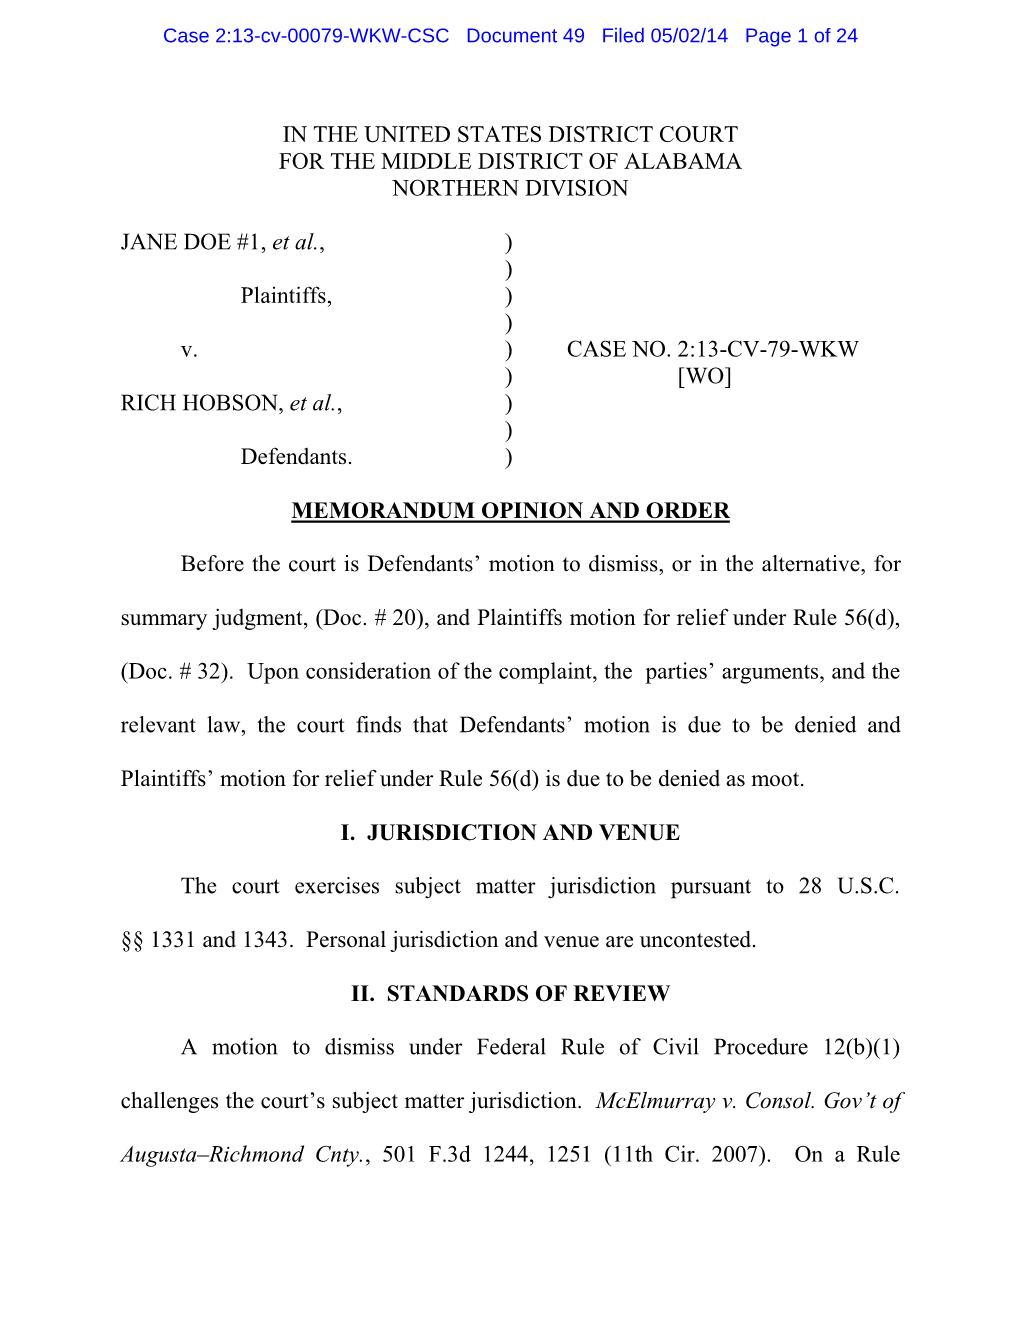 Case 2:13-Cv-00079-WKW-CSC Document 49 Filed 05/02/14 Page 1 of 24